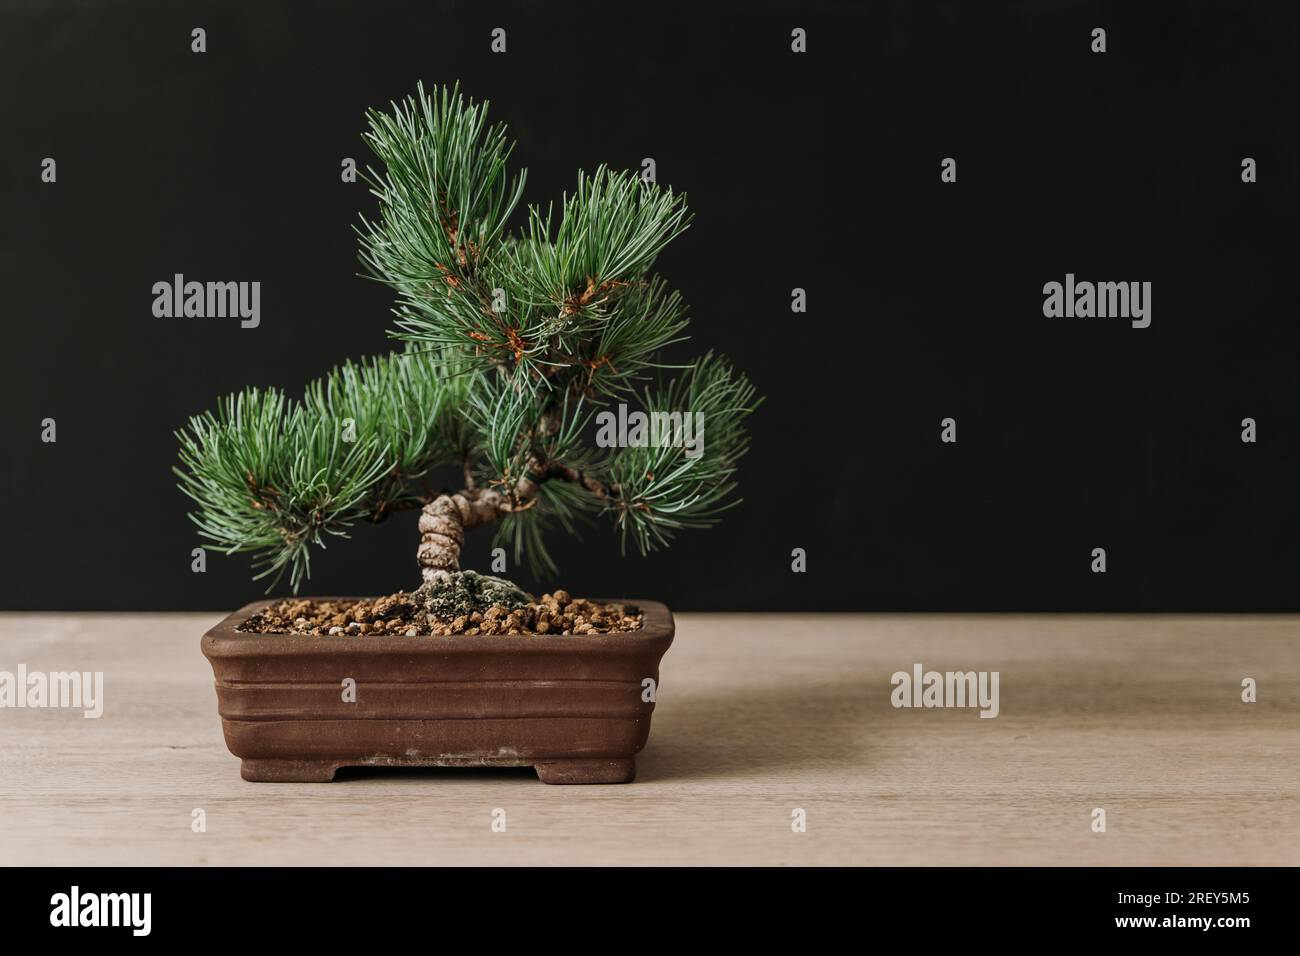 Small bonsai tree Japanese White Pine 'Pinus Parviflora' in a brown pot on a wooden table and dark background Stock Photo